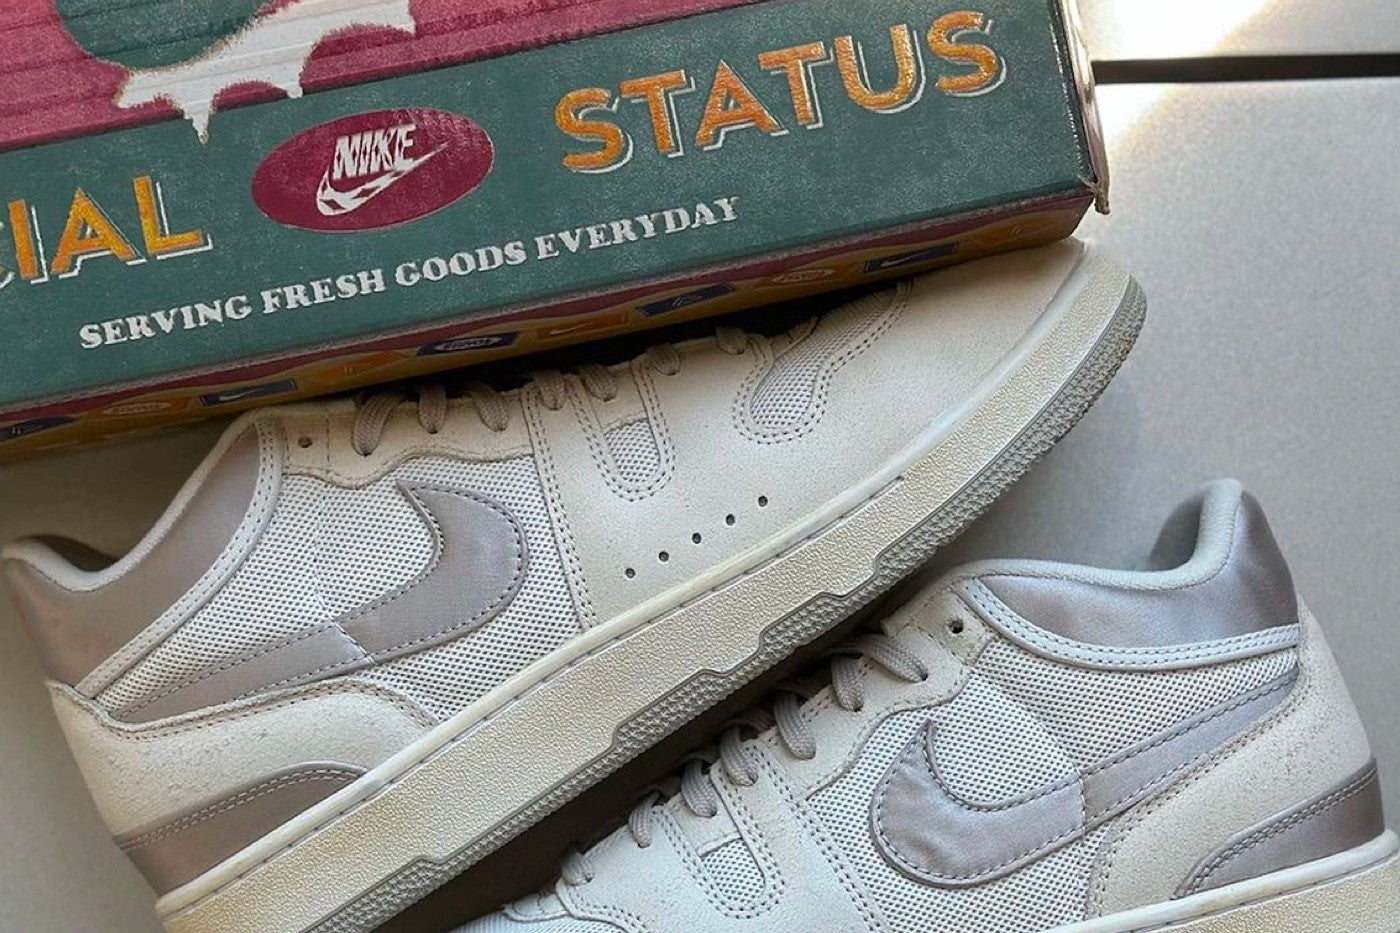 Get Up Close With the Social Status x Nike Mac Attack